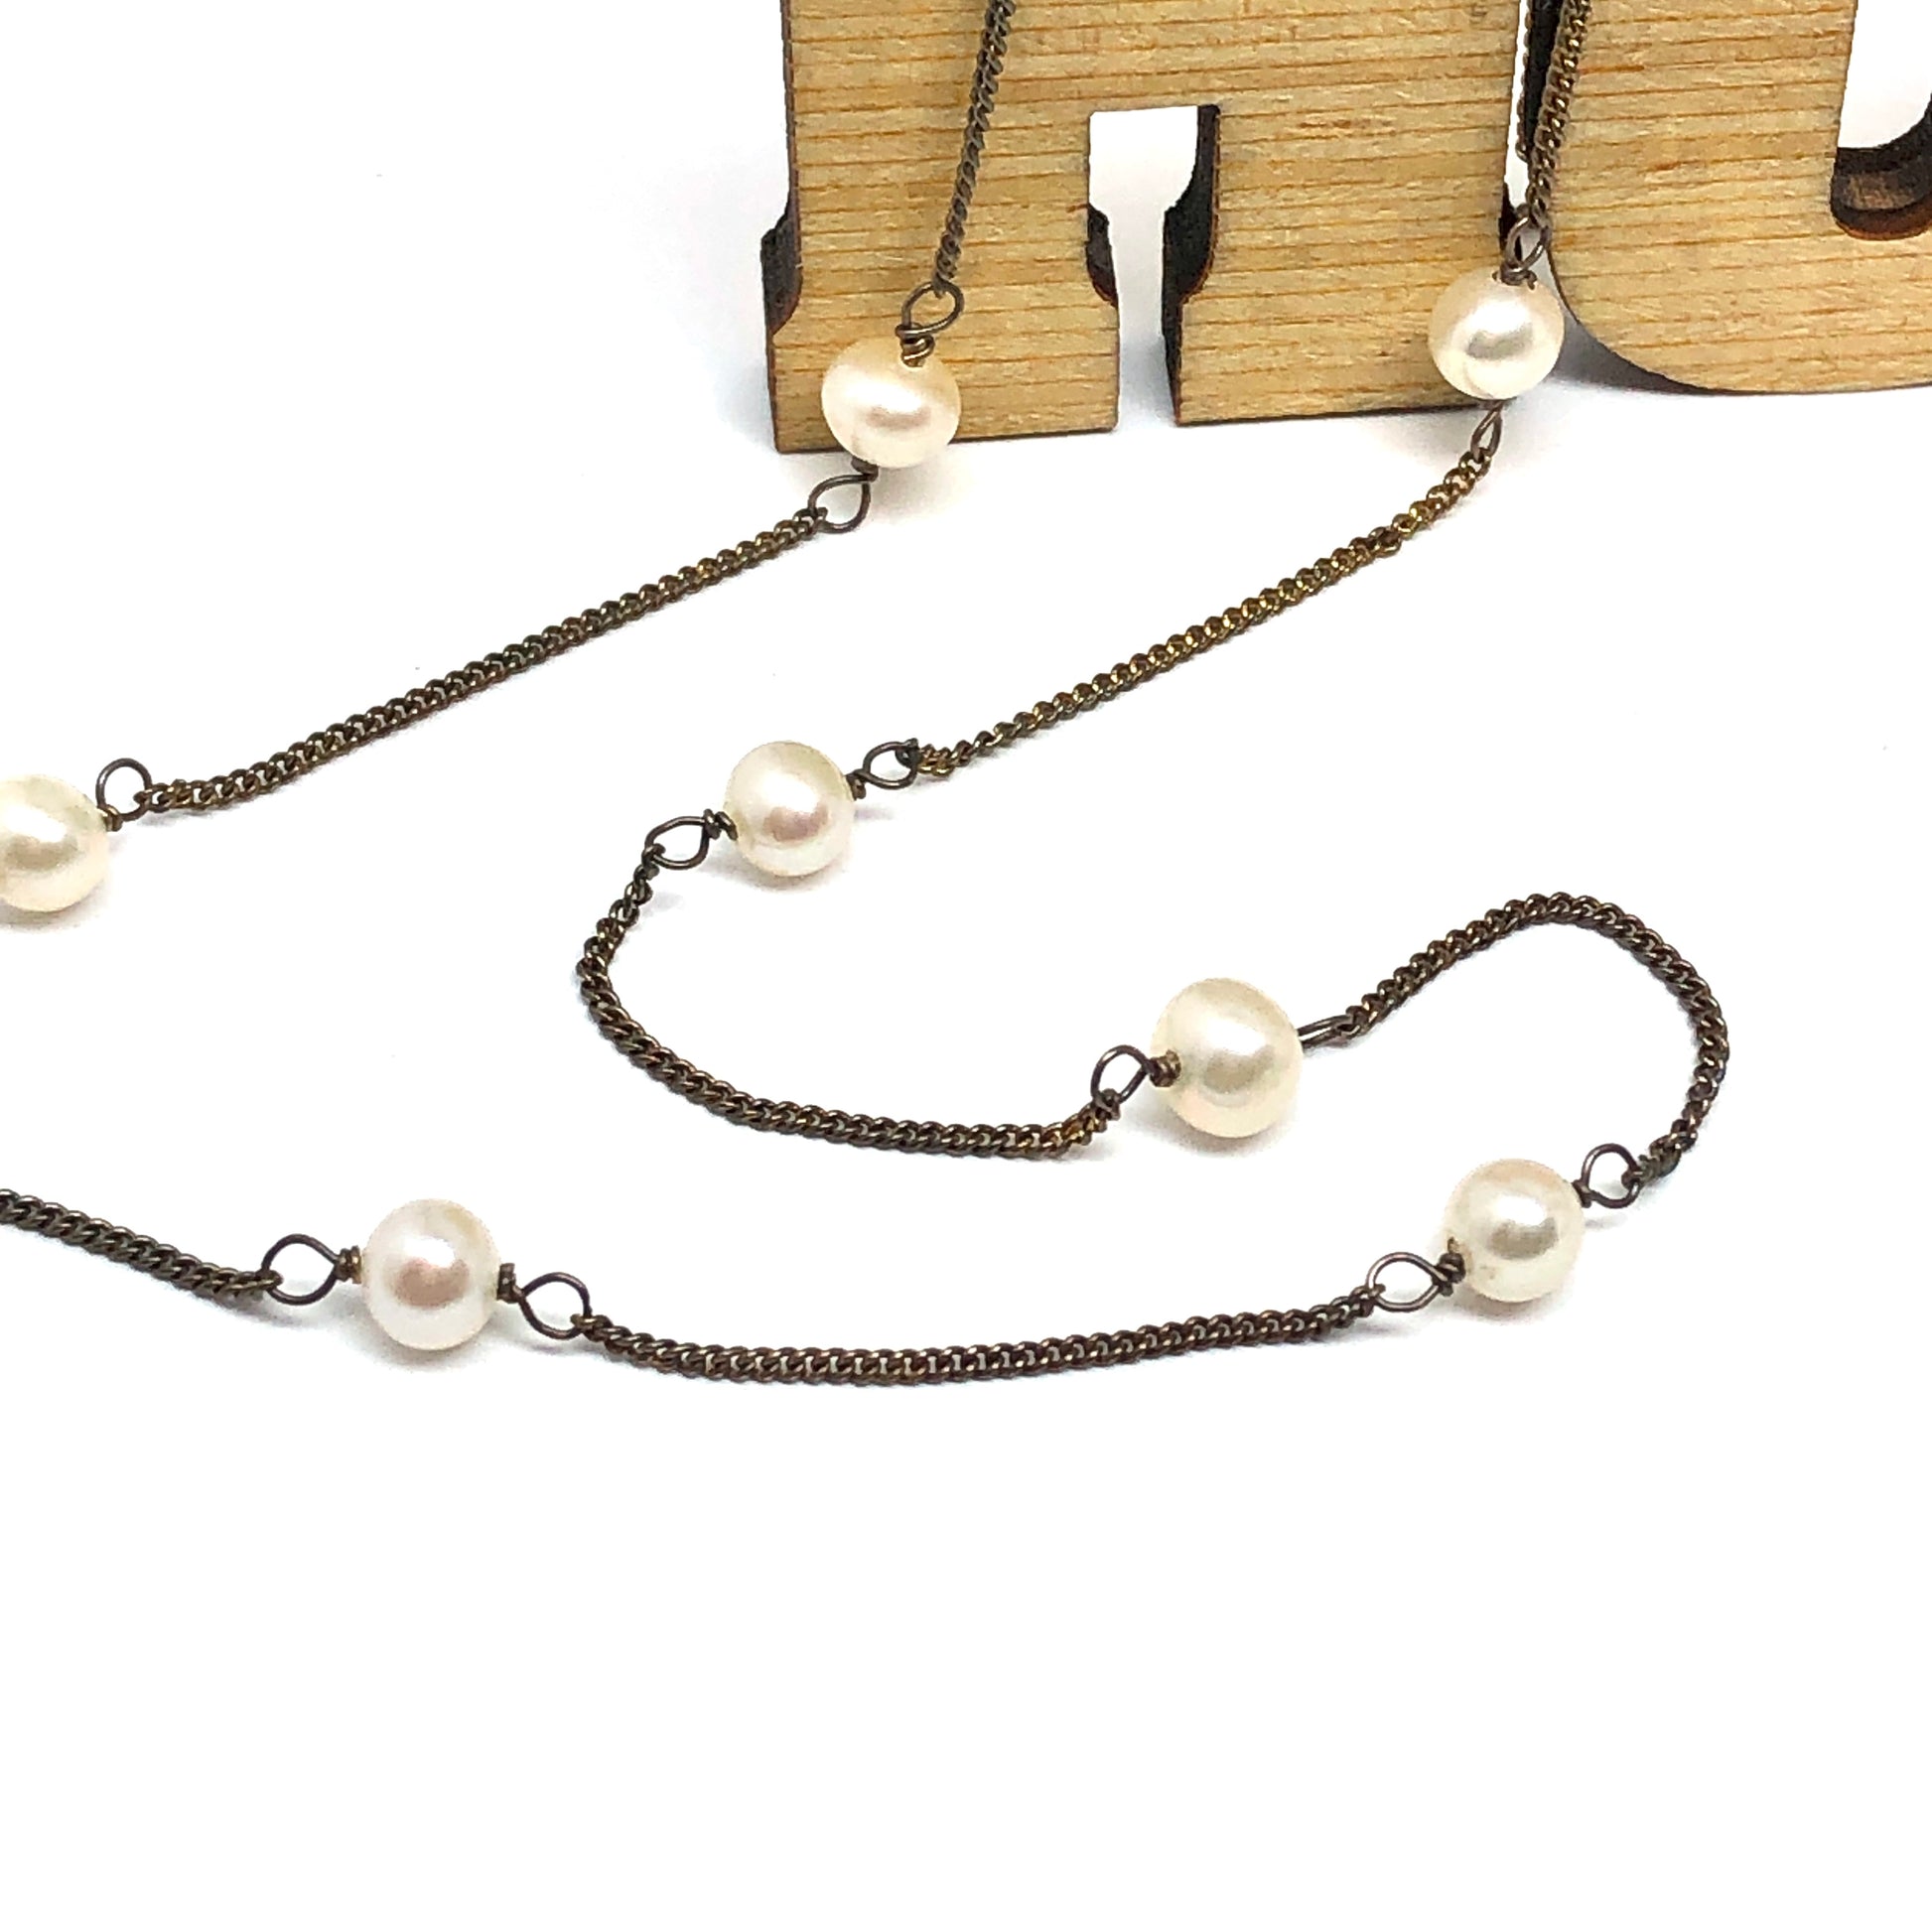 32" Oxidized Antiqued Gold Sterling Silver Rustic Pearl Station Necklace | Discount Overstock Jewelry